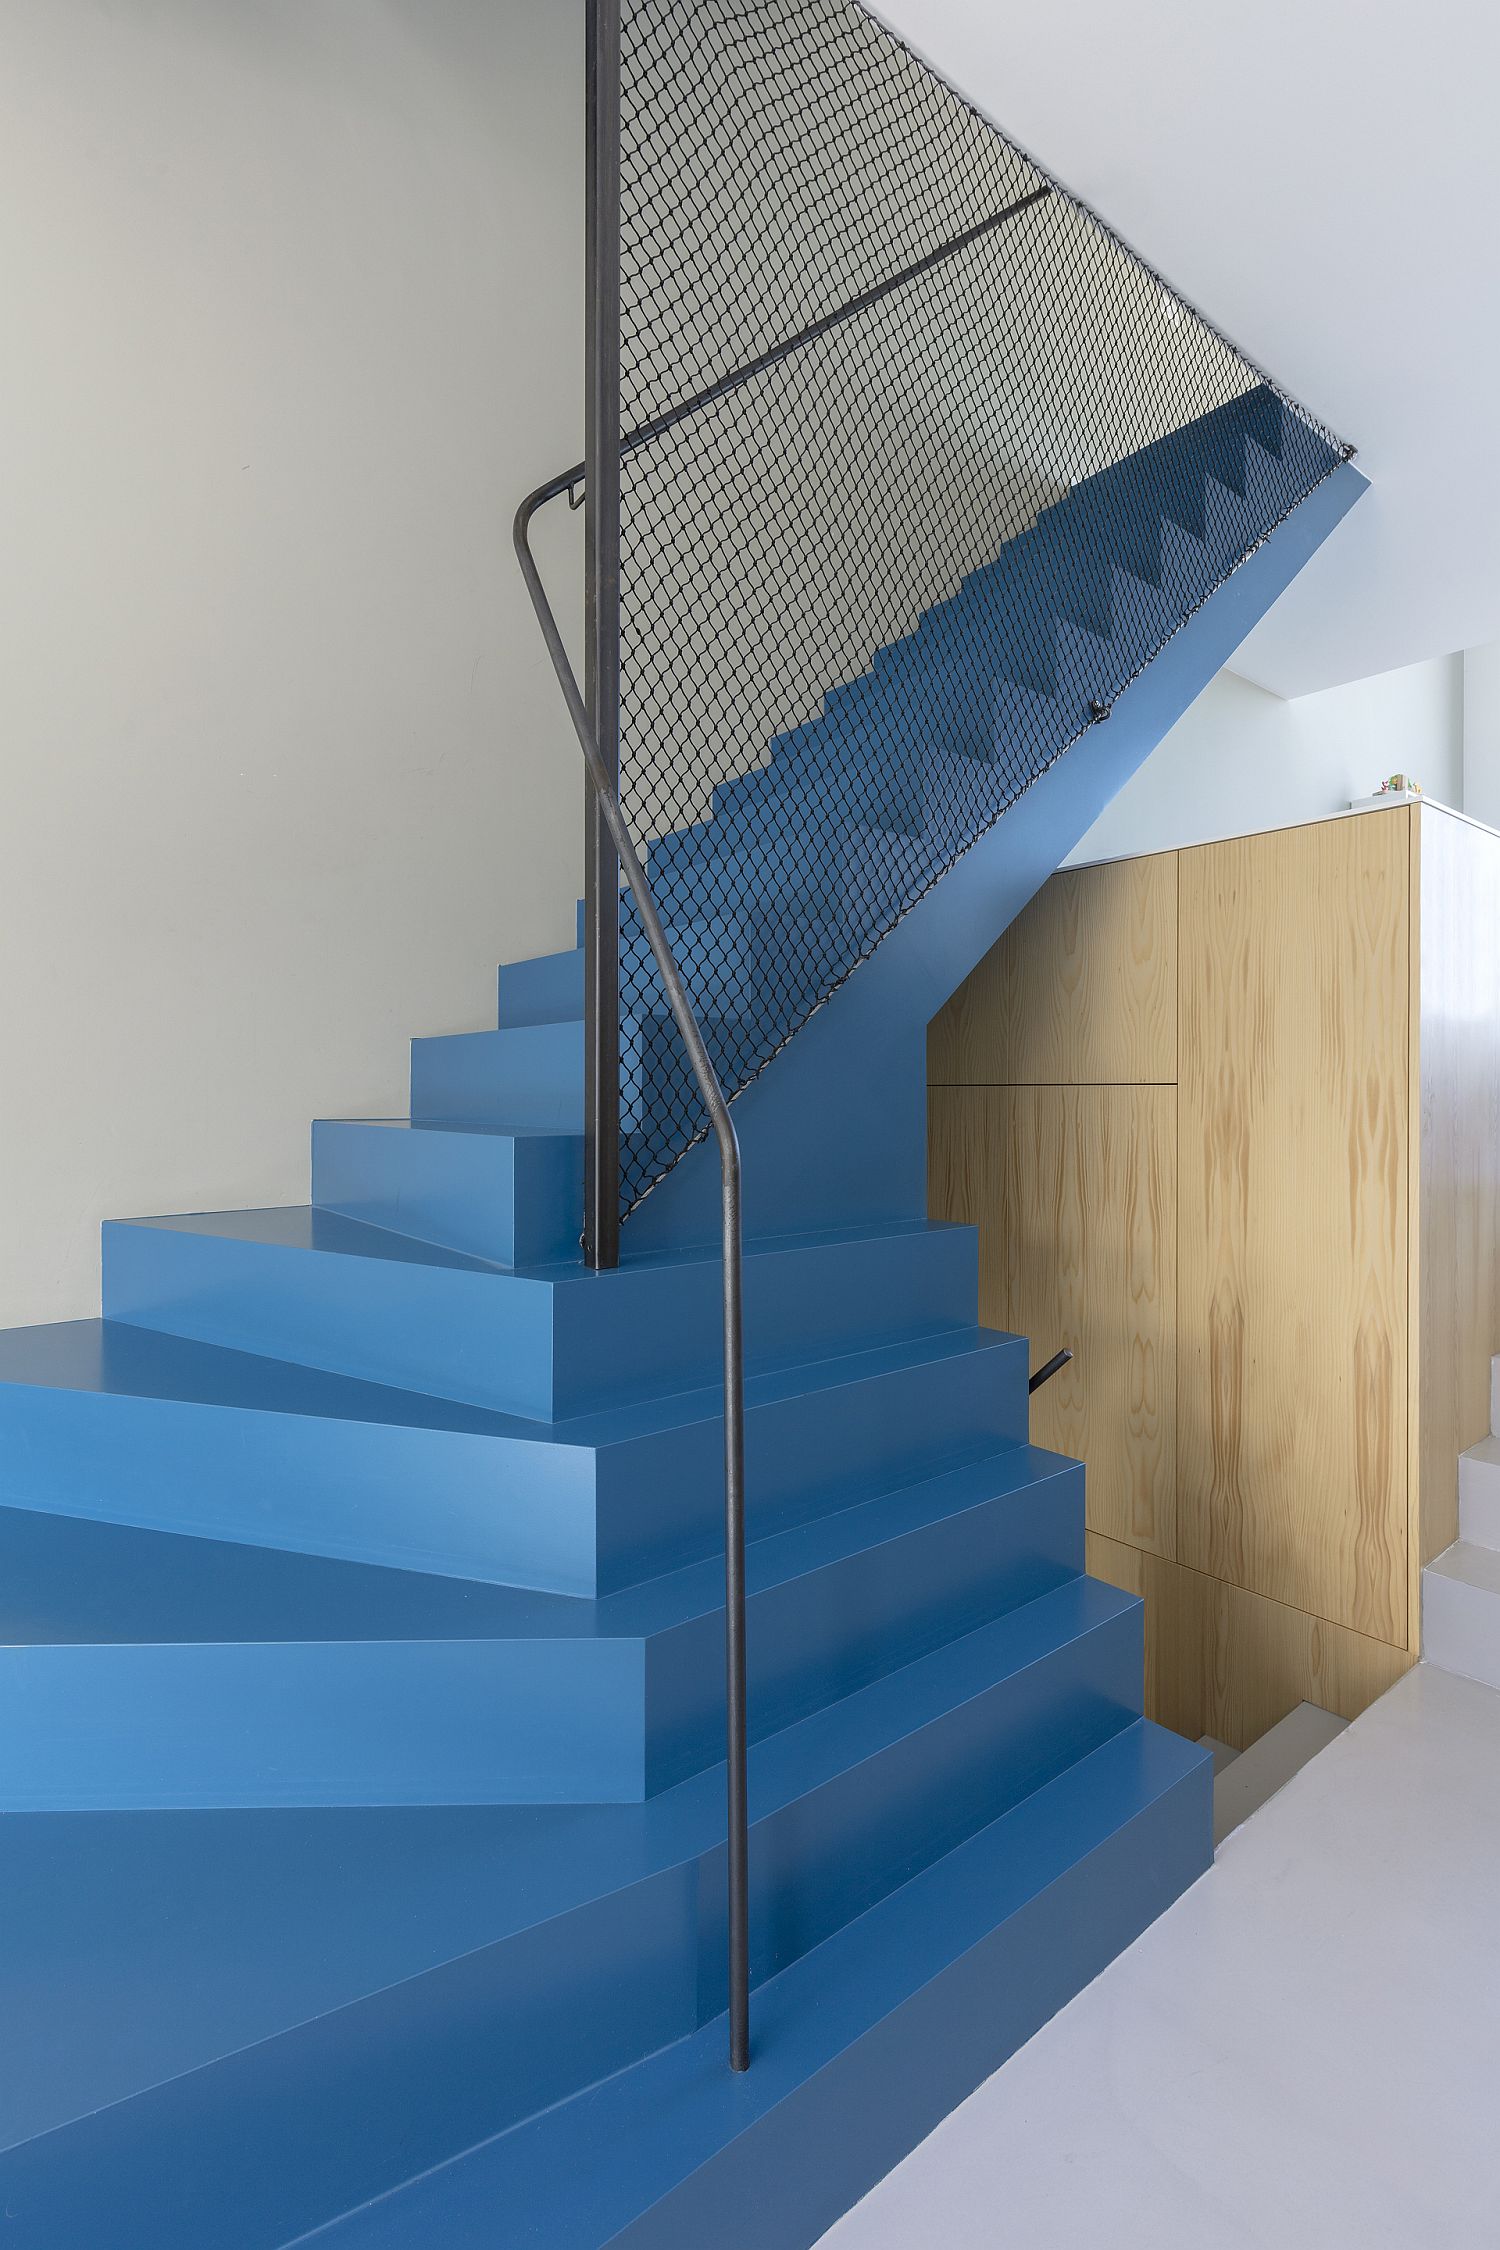 Striking-blue-staircase-with-mesh-railing